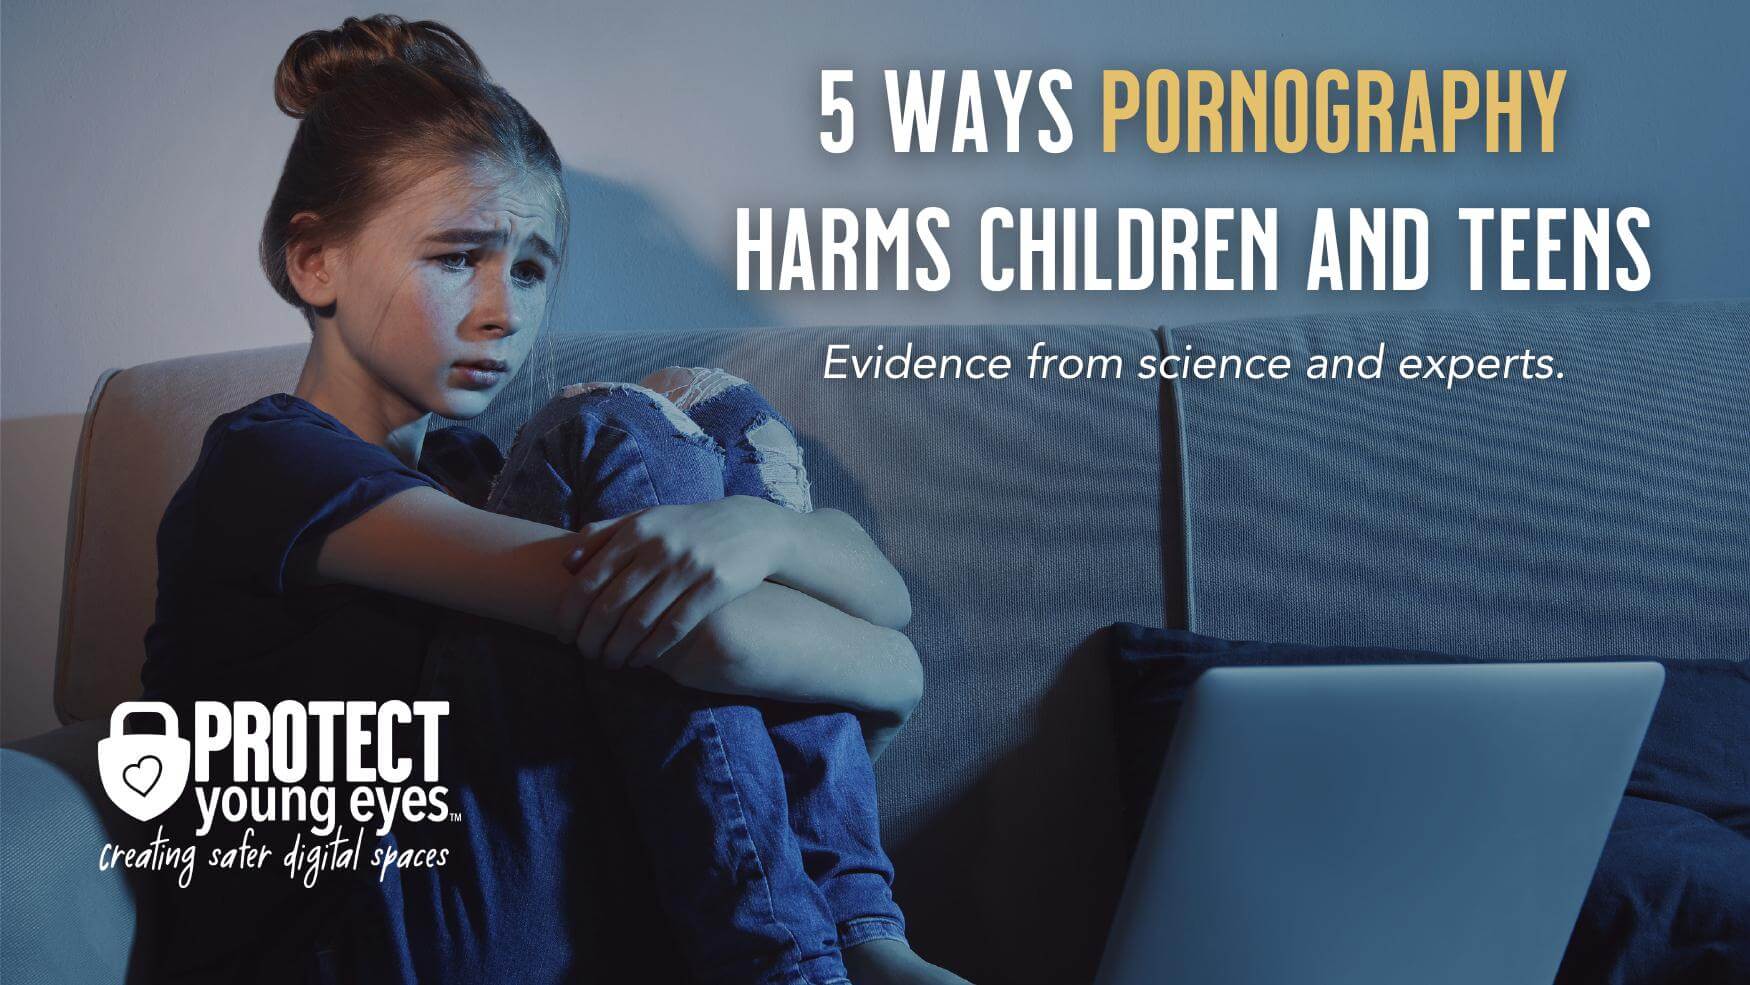 5 Ways Pornography Harms Children and Teens